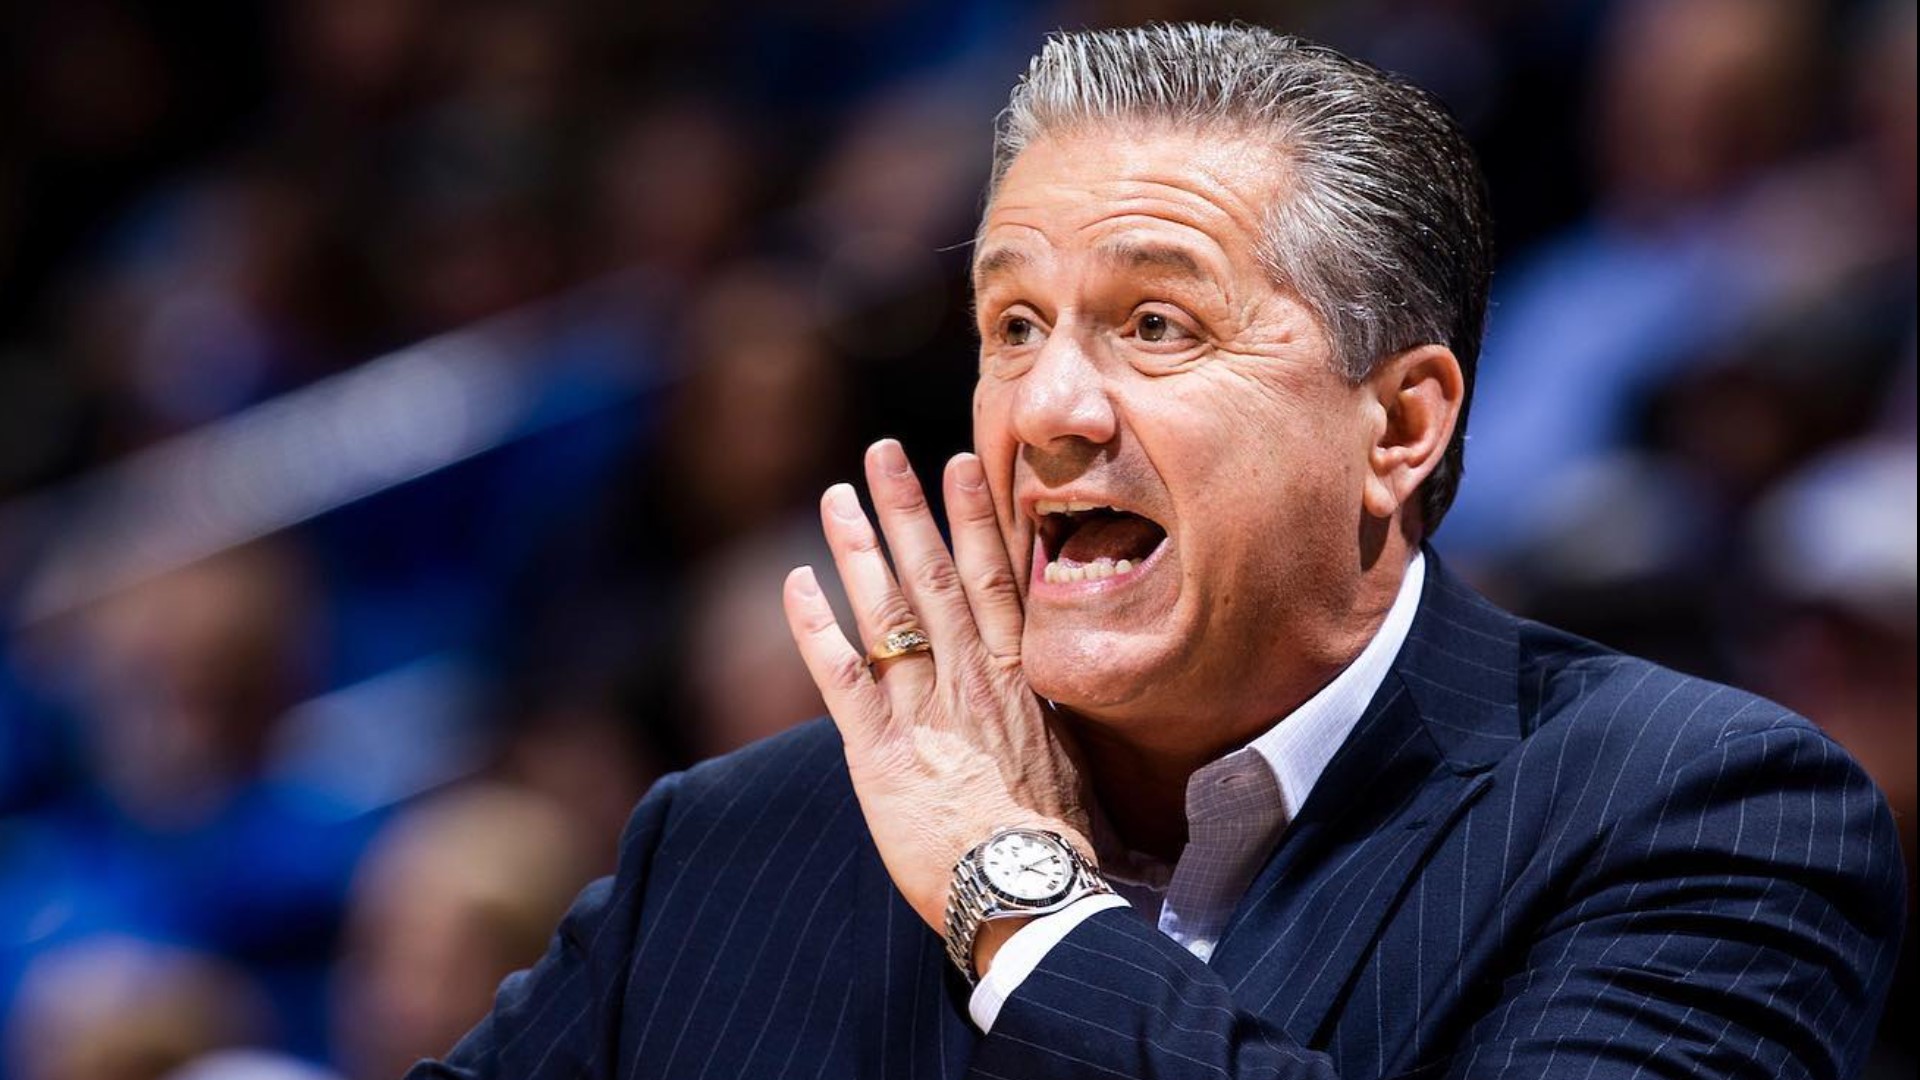 The U of A announced that Calipari signed a five-year contract with a yearly payout totaling around $7 million per season.